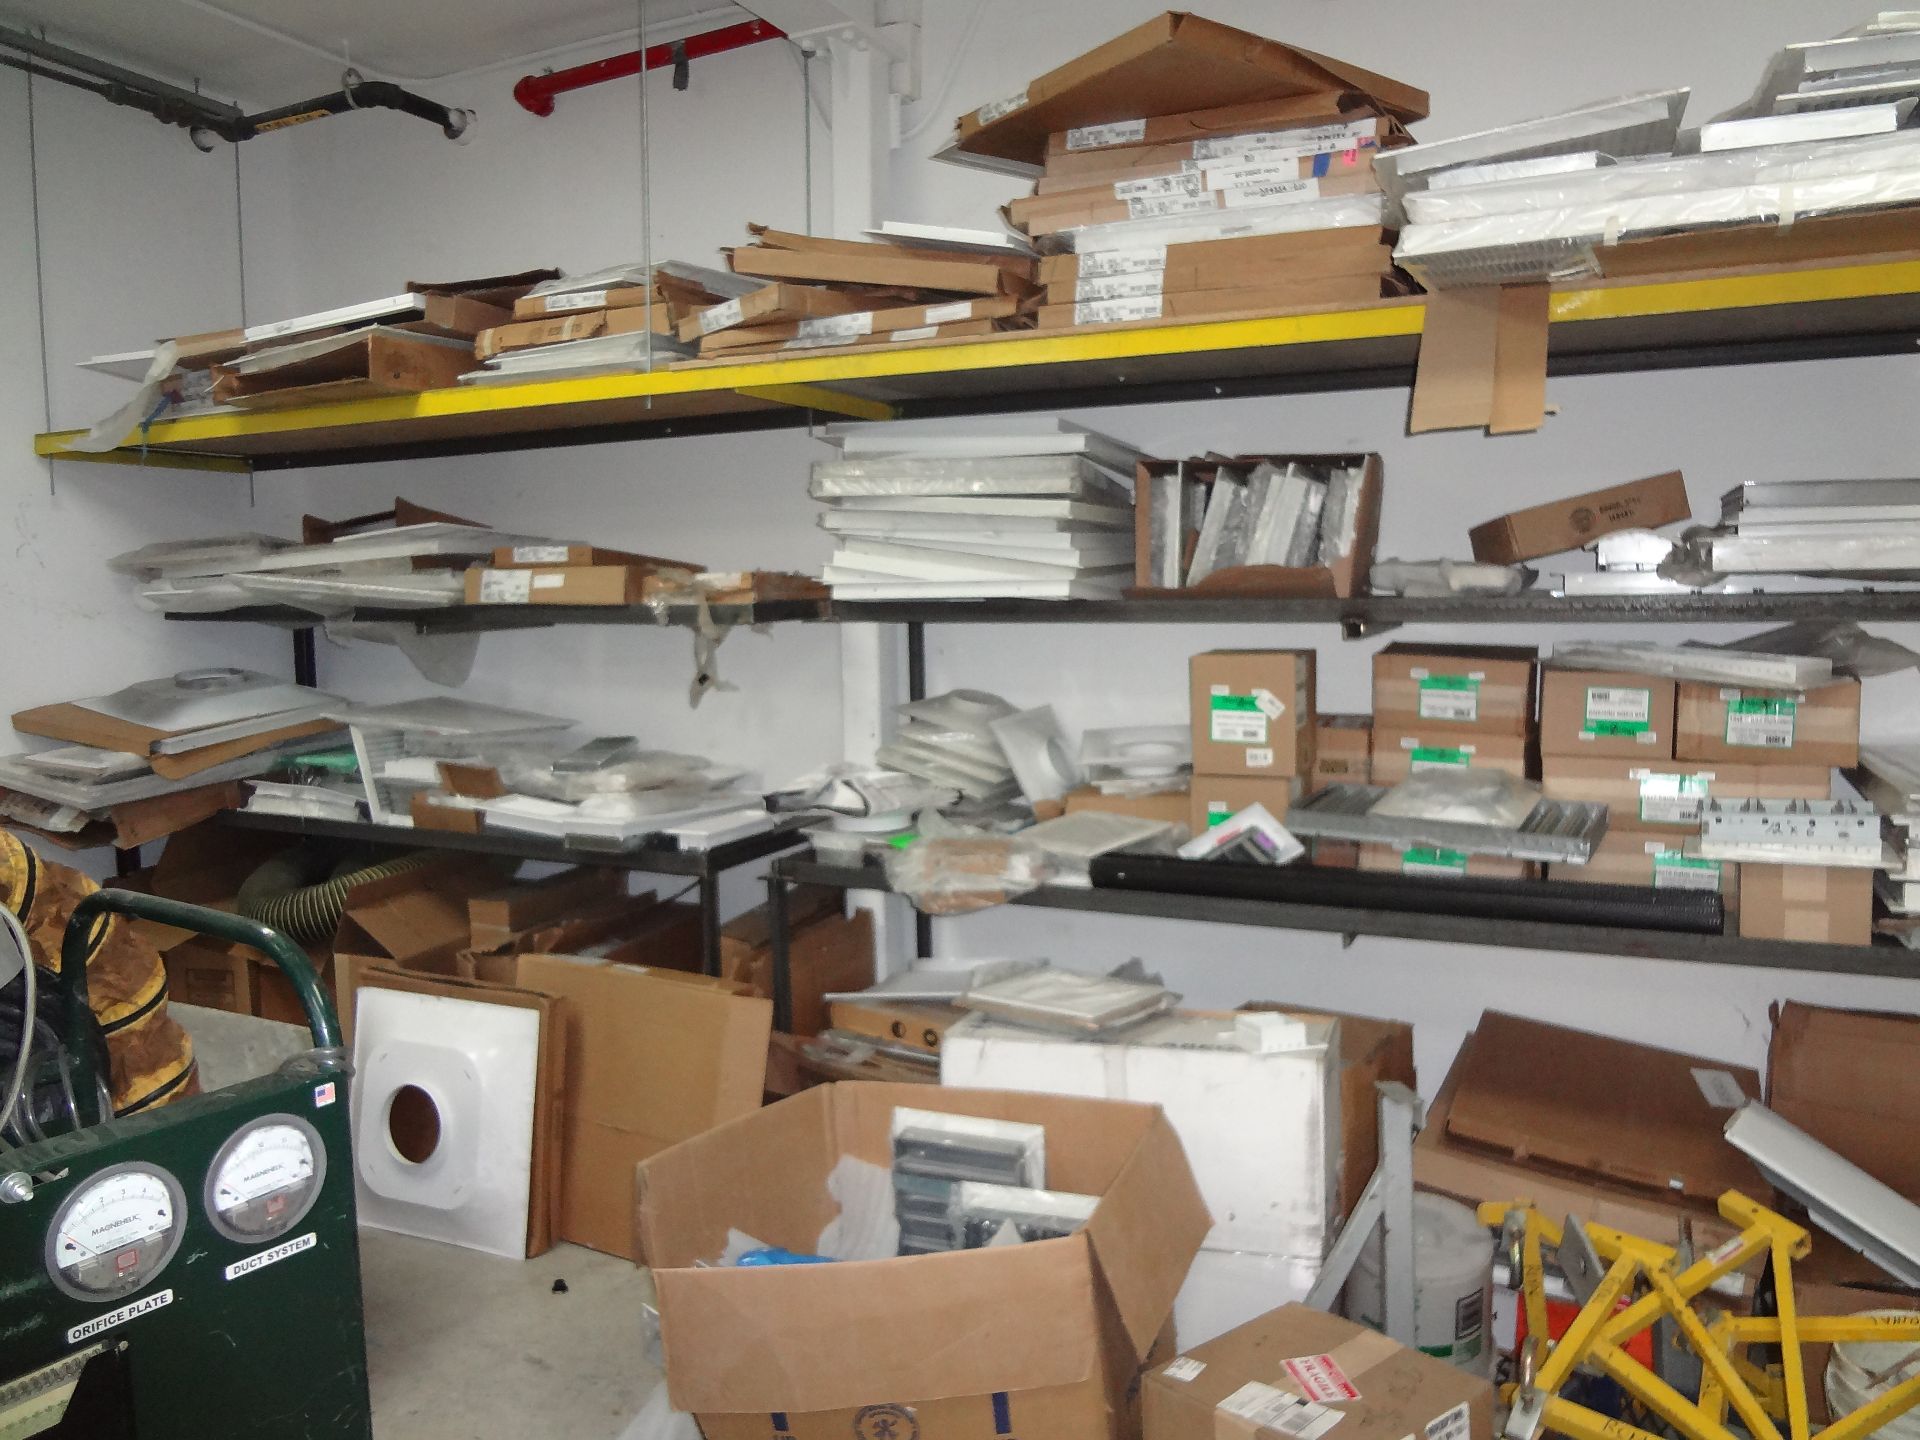 ASSORTED ELBOWS, COLLARS, VENTS, ACCESS DOORS, CANVAS, ETC. - Image 3 of 5